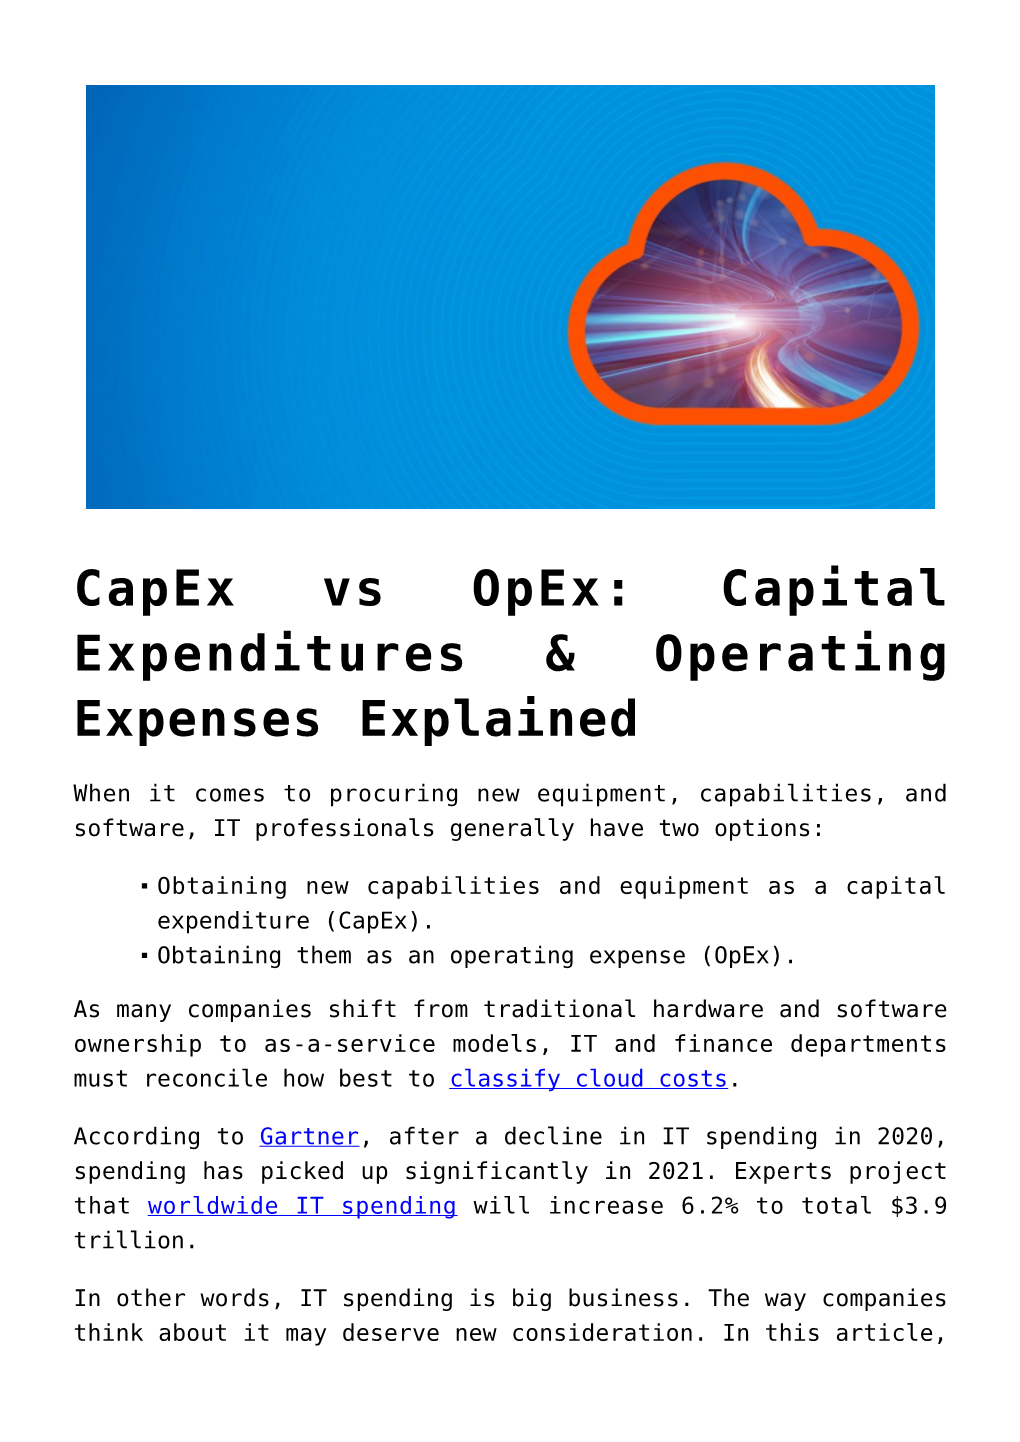 Capex Vs Opex: Capital Expenditures & Operating Expenses Explained